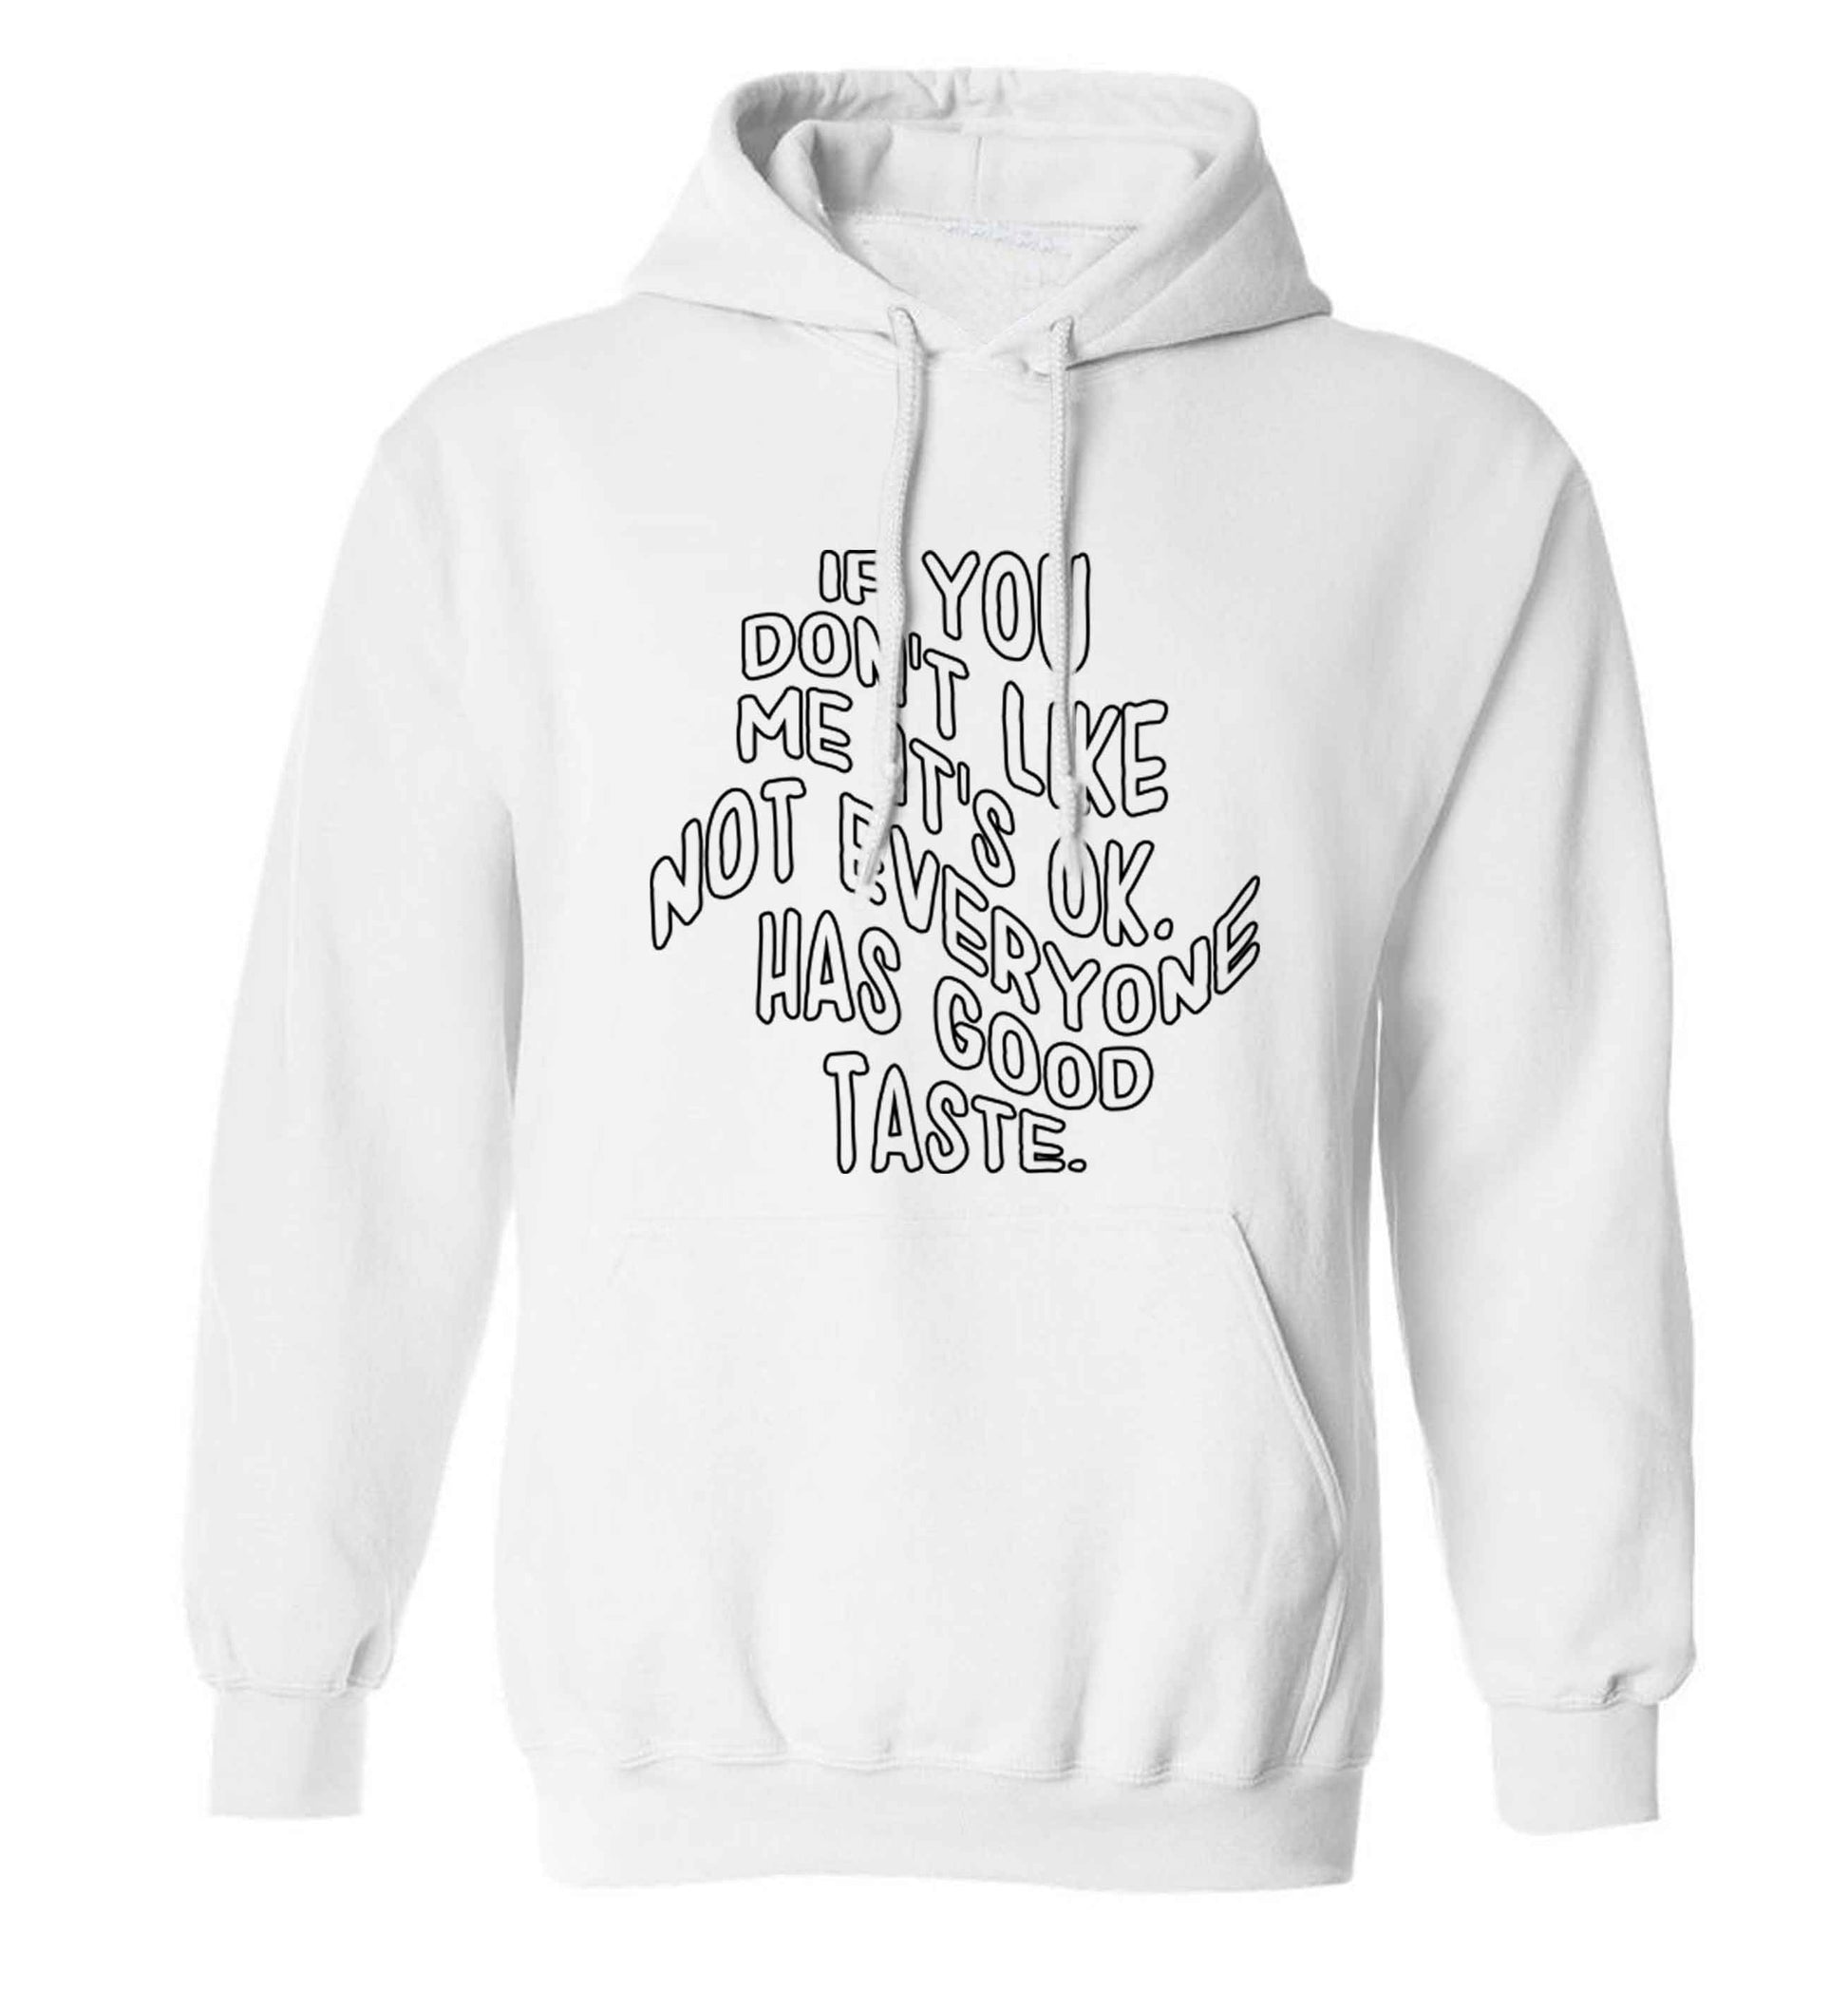 If you don't like me it's ok not everyone has good taste adults unisex white hoodie 2XL